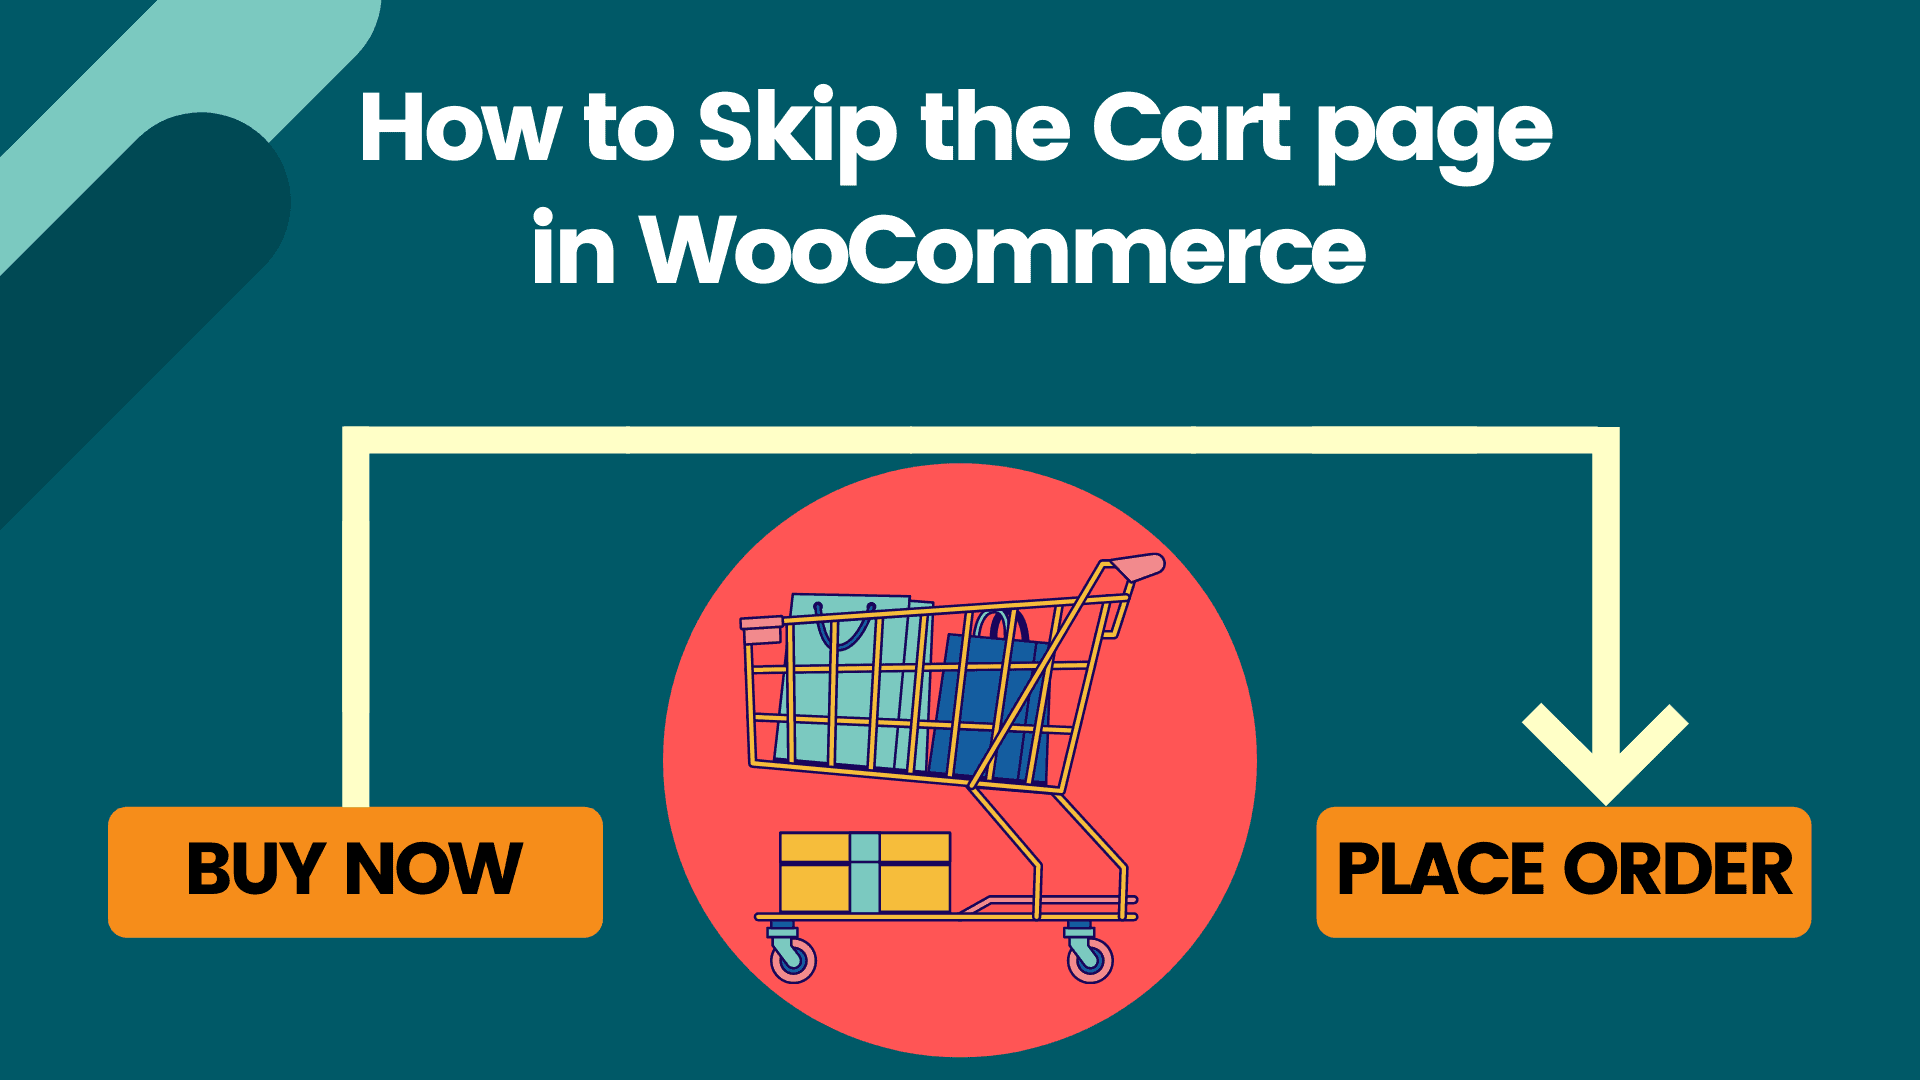 How to create a WooCommerce direct checkout link - QuadLayers